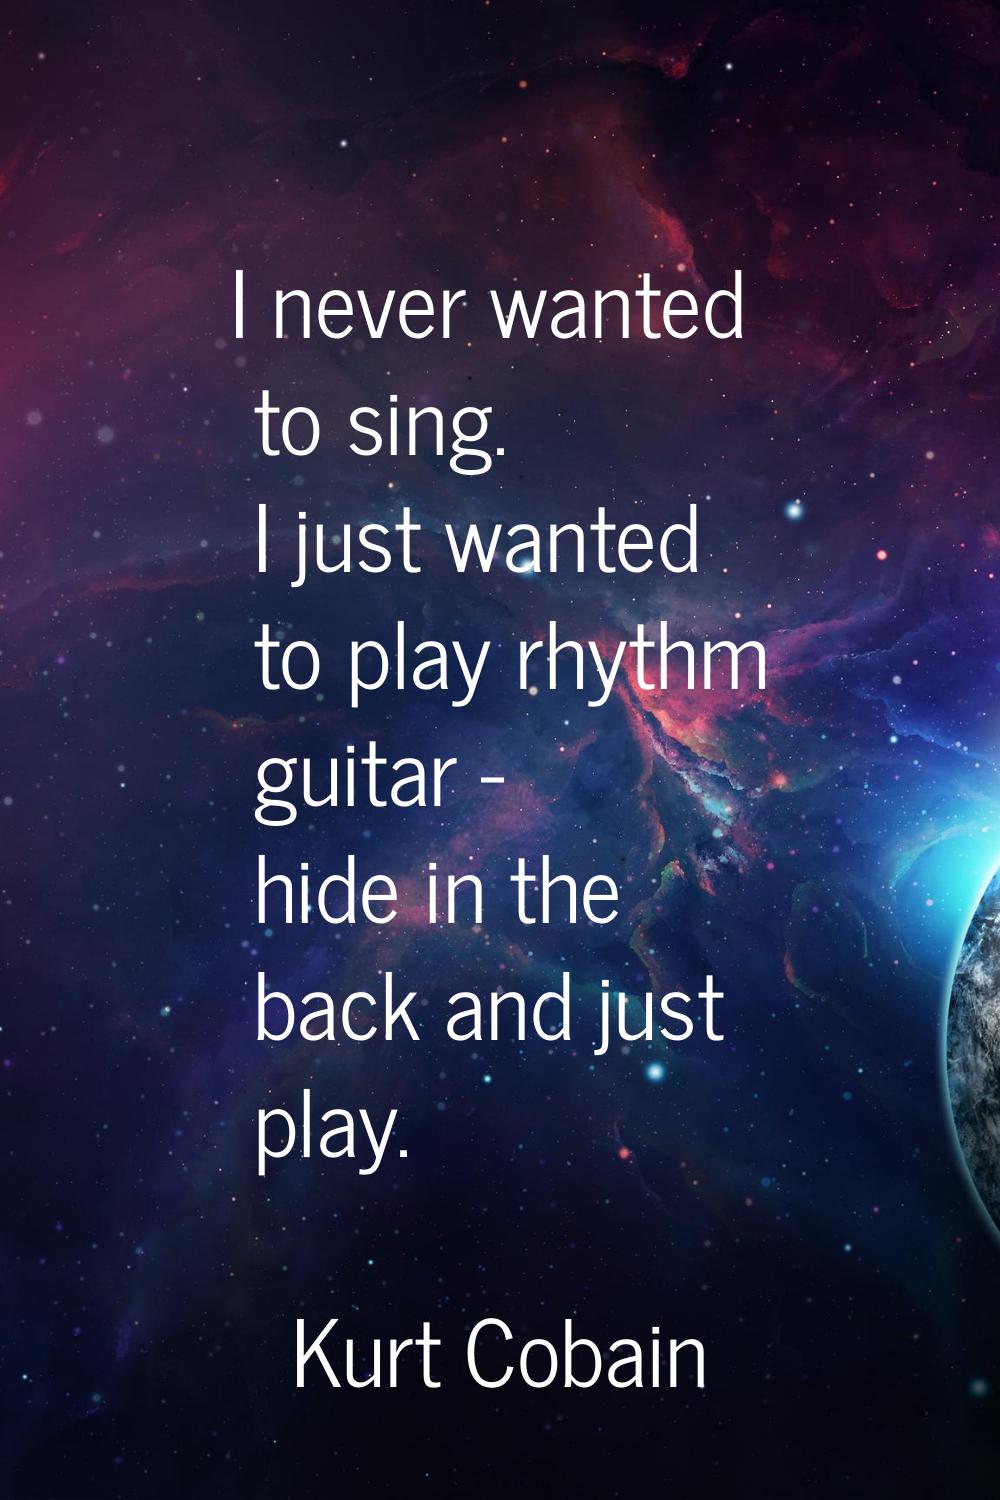 I never wanted to sing. I just wanted to play rhythm guitar - hide in the back and just play.